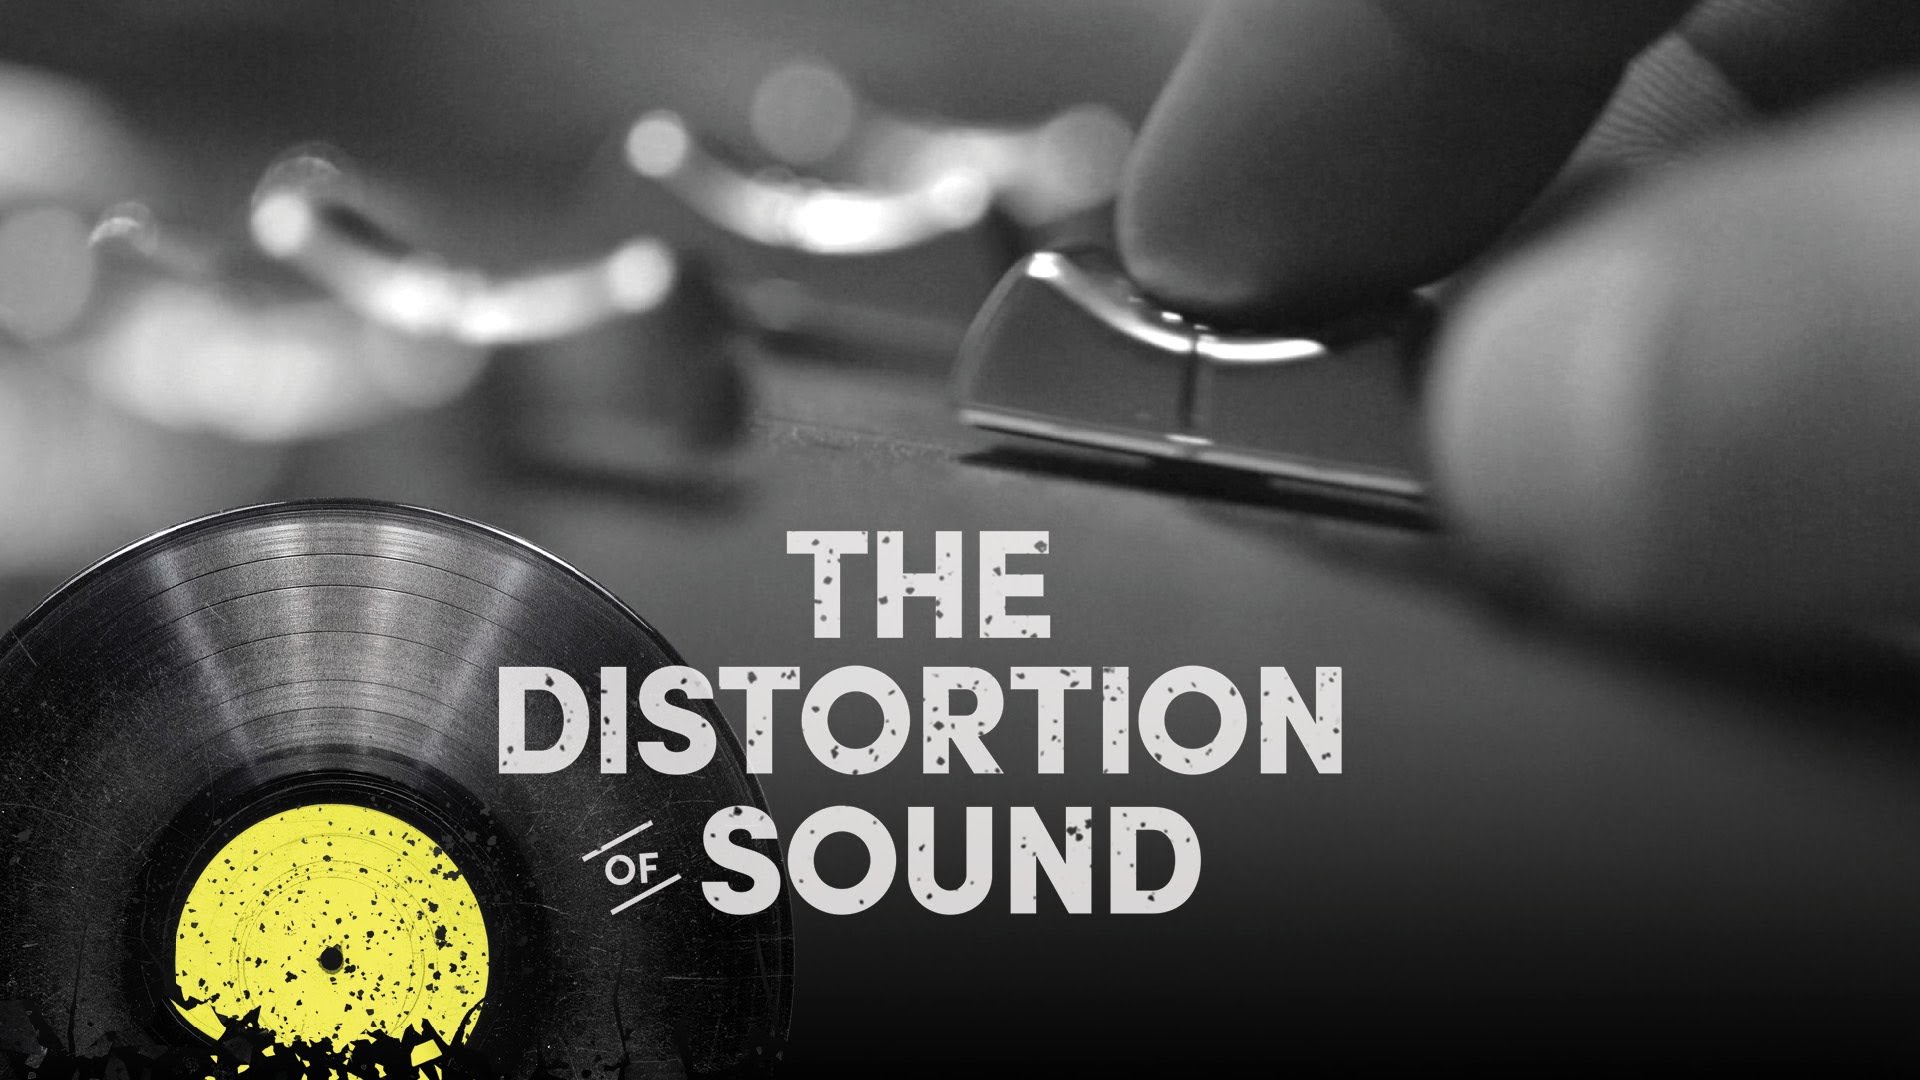 The bold claims in "The Distortion of Sound" have been drawing some criticism from informed commentators.